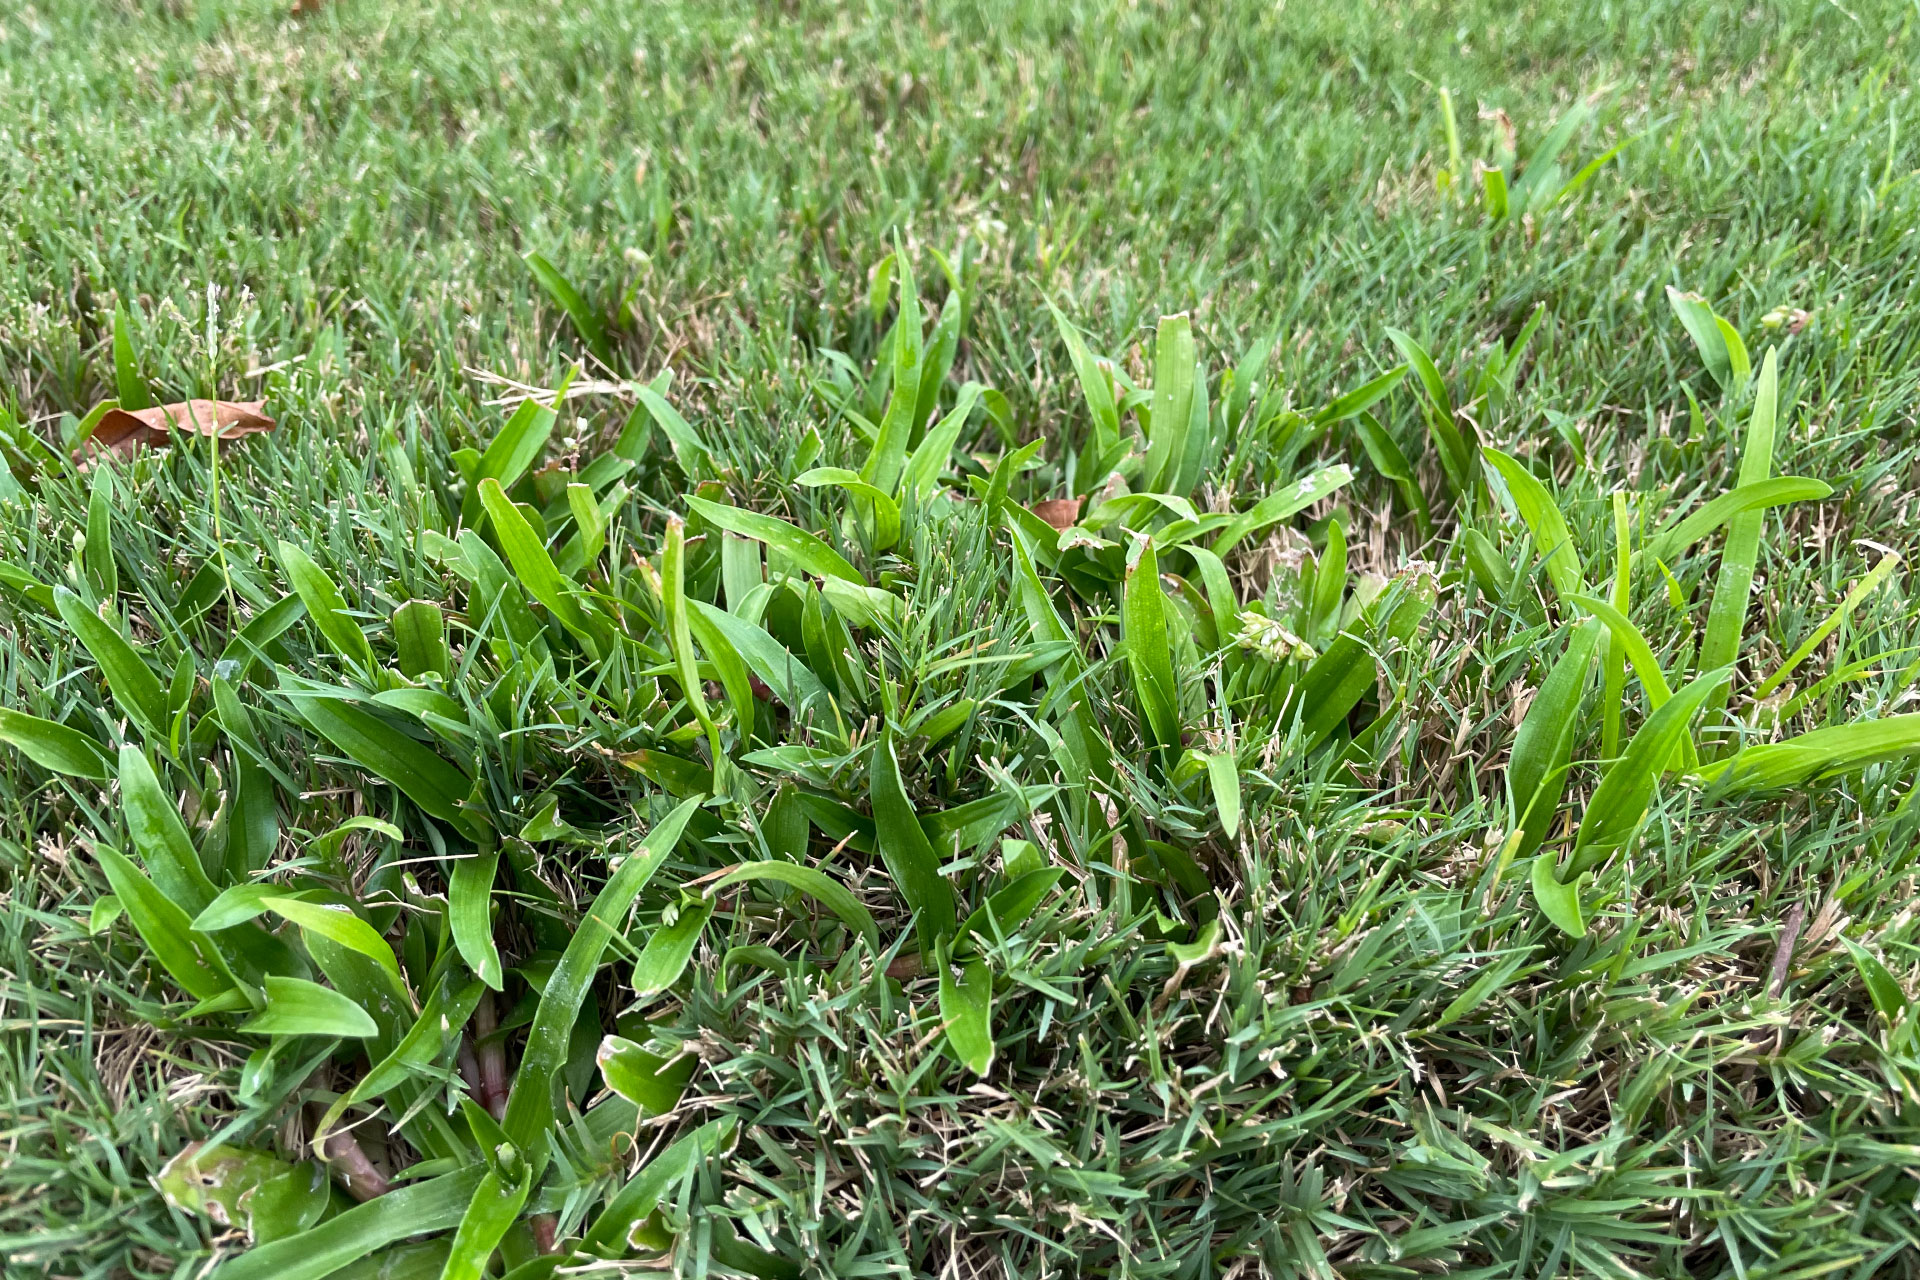 How to Control Doveweed in Your Lawn